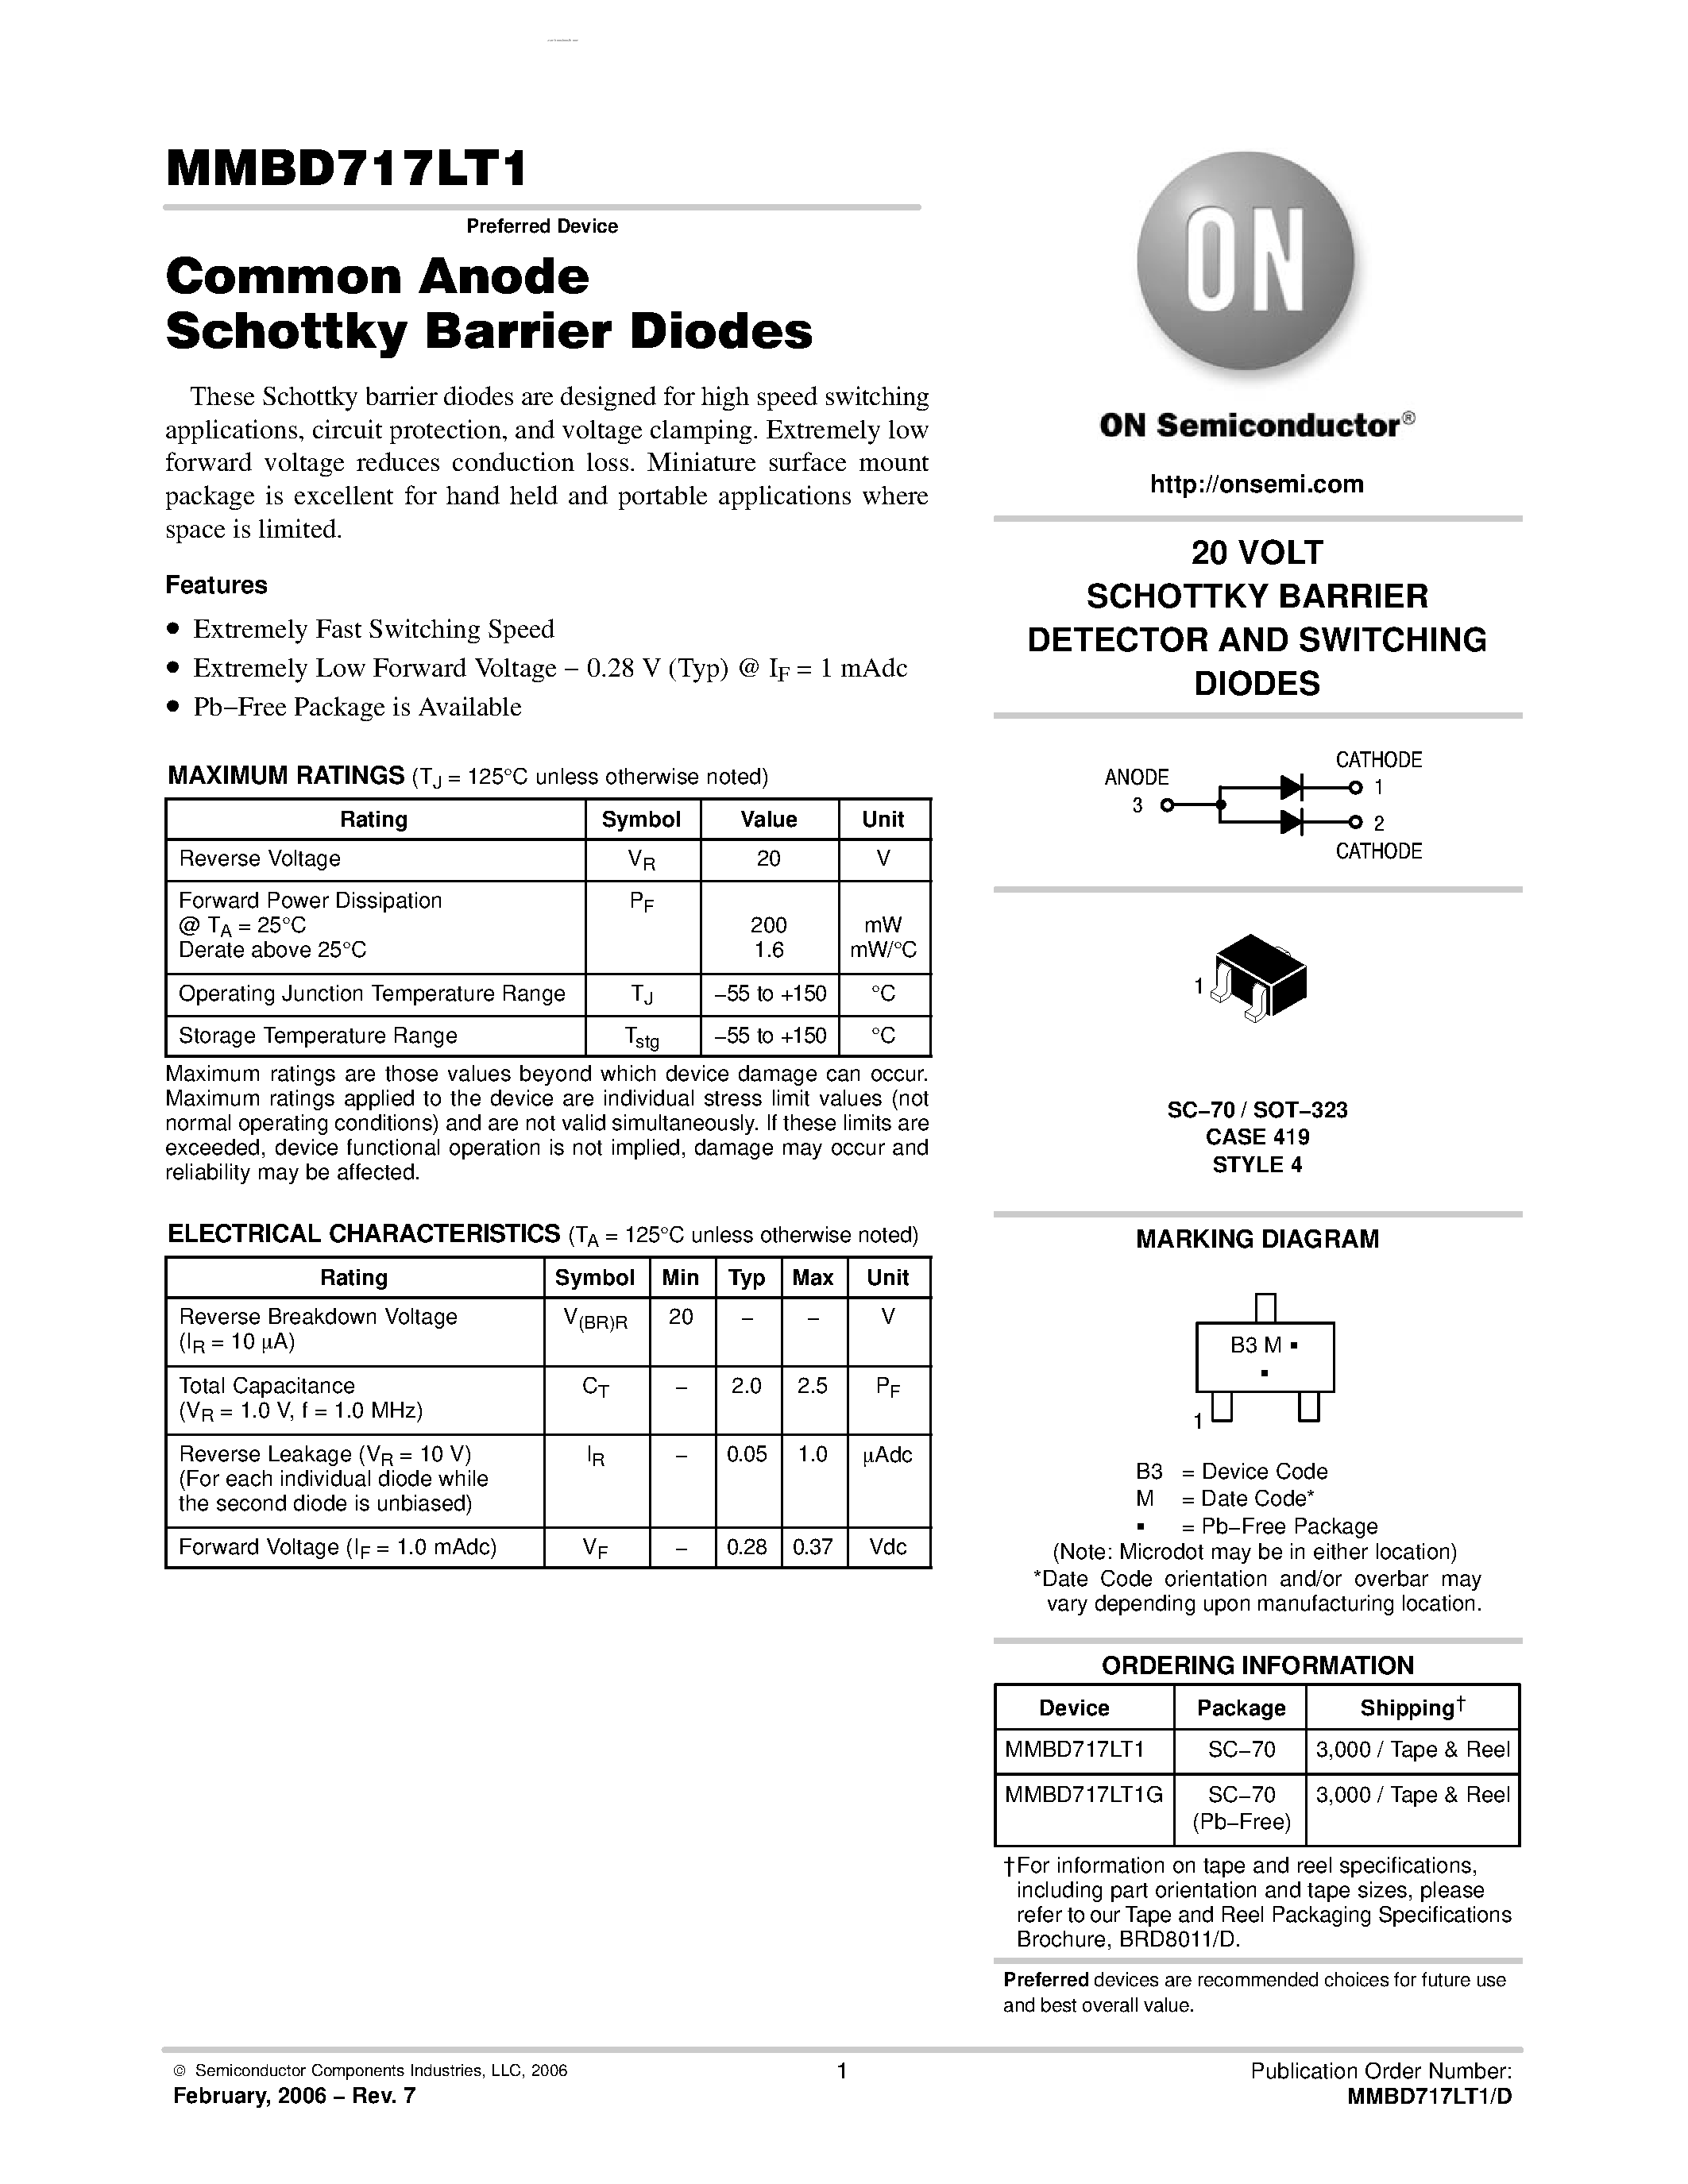 Datasheet MMBD717LT1 - Common Anode Schottky Barrier Diodes page 1